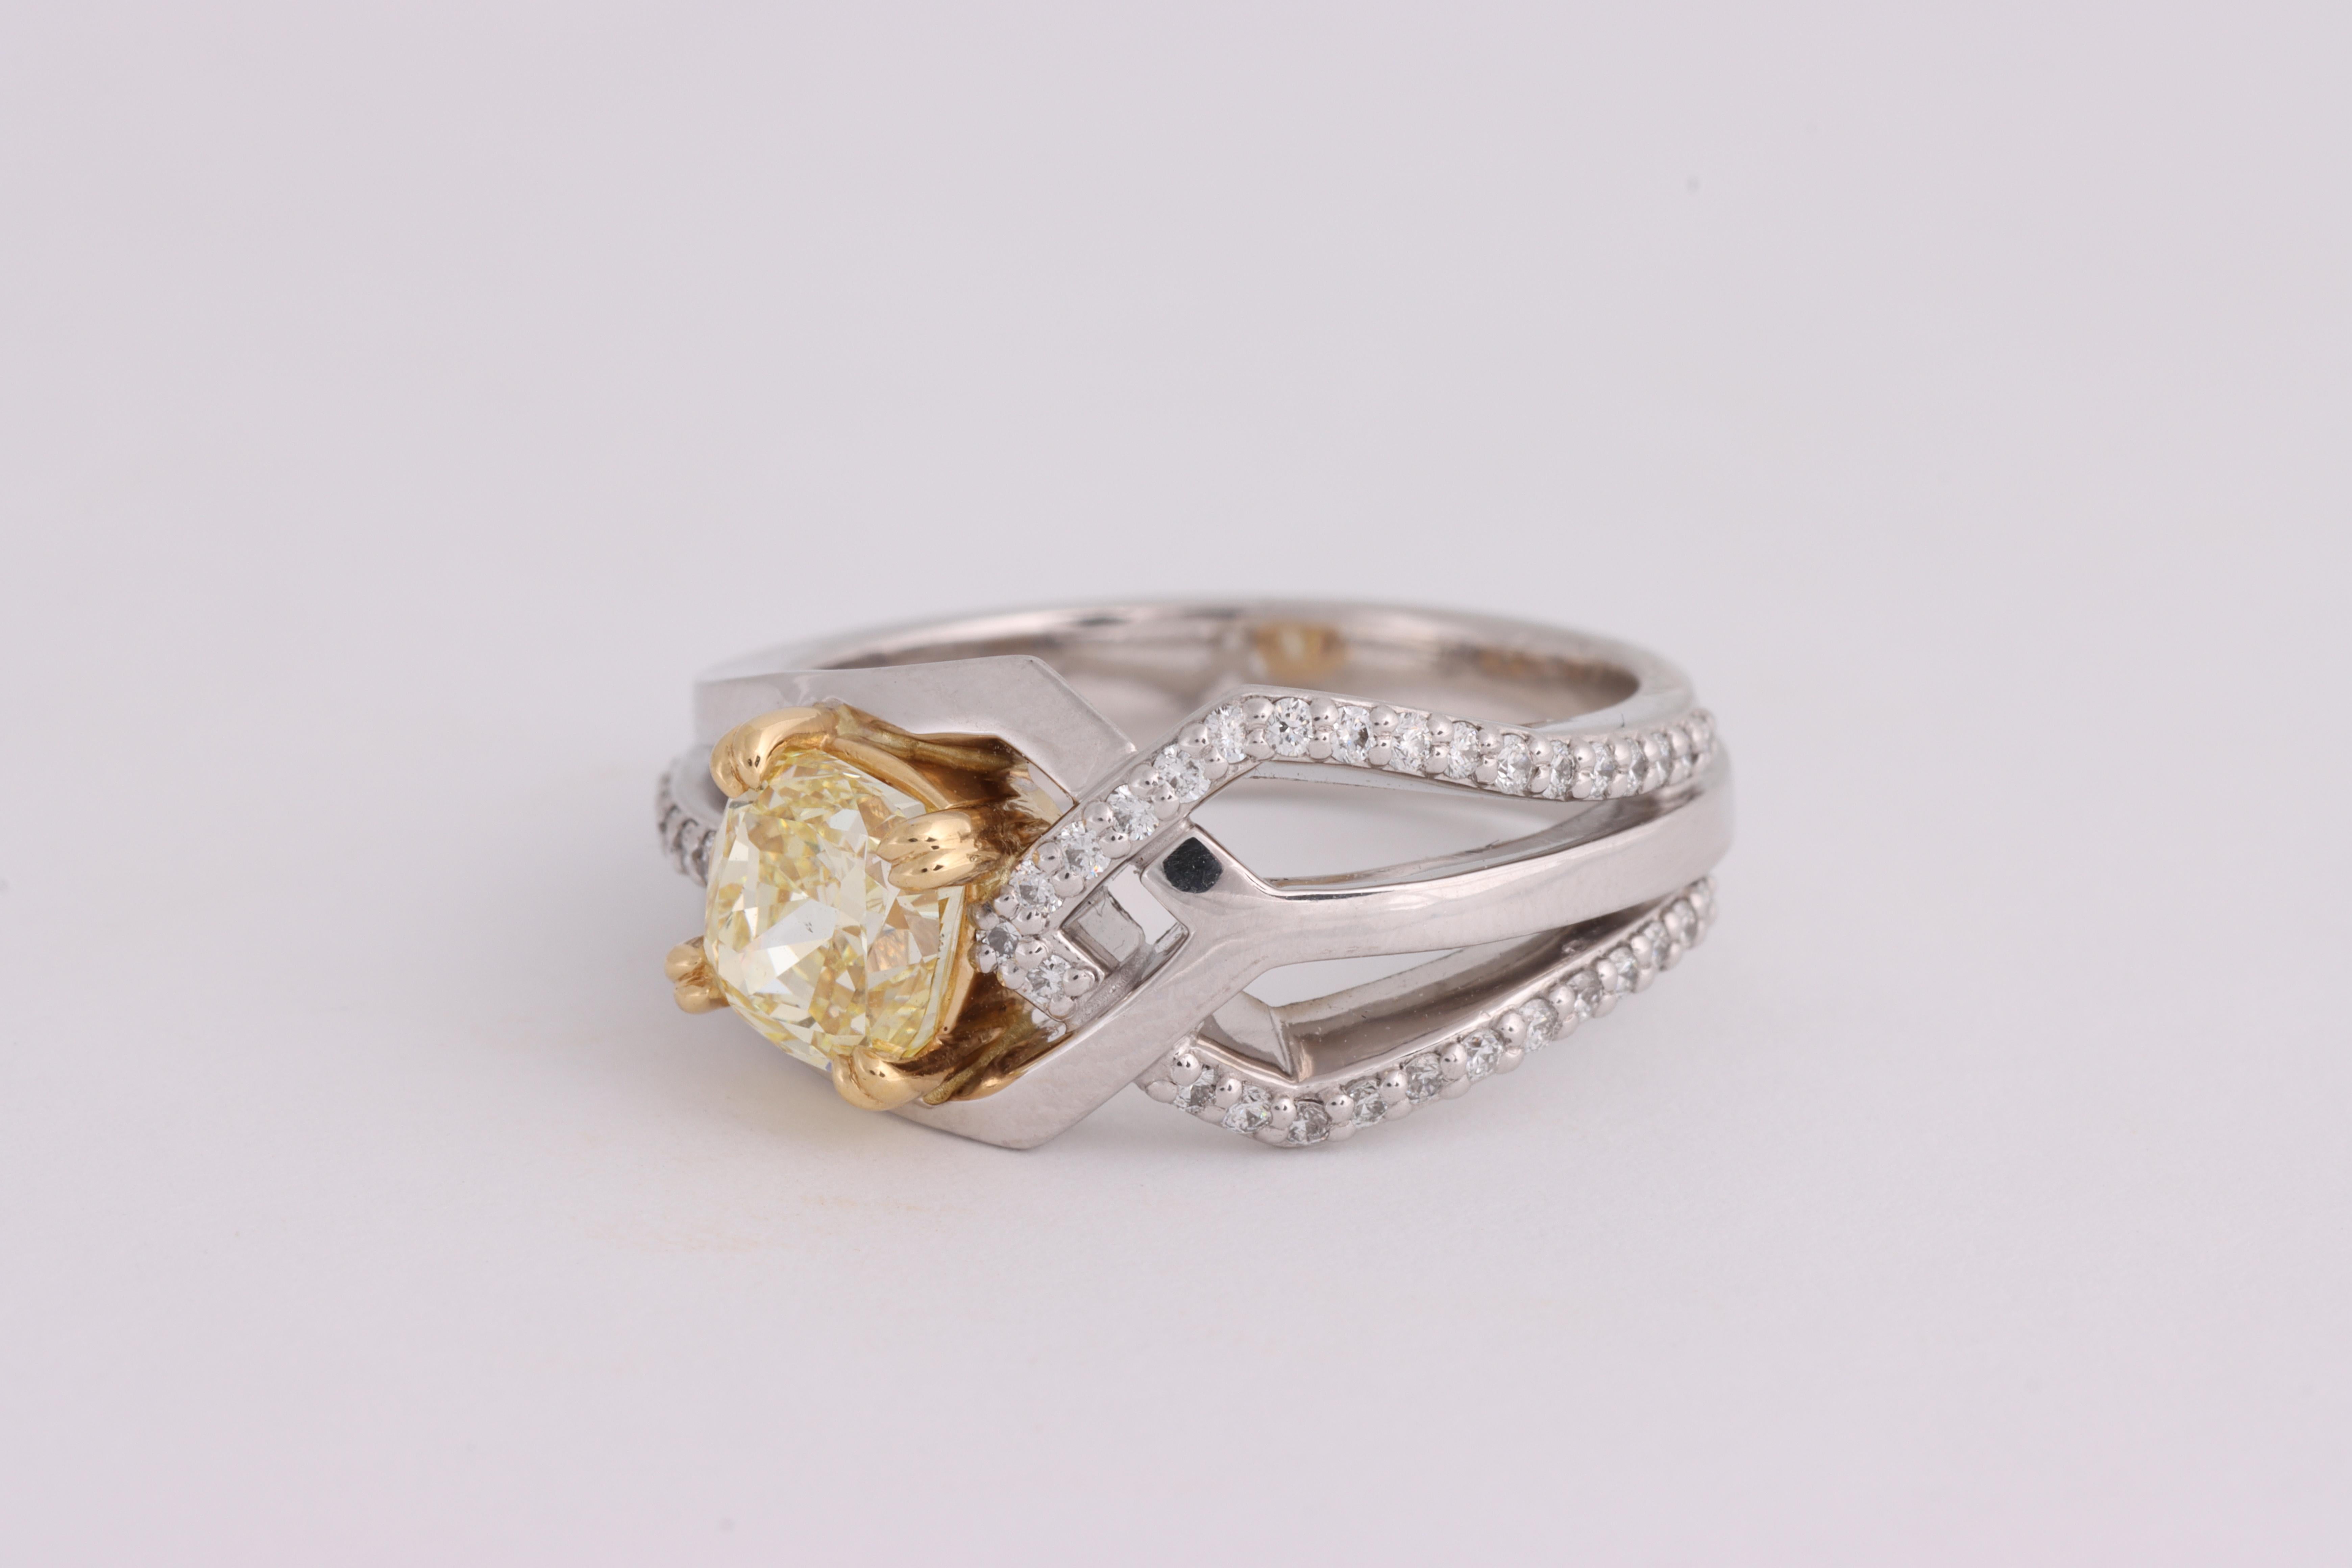 18 karat white gold pave set yellow gold claw set ring featuring on GIA Certified Cushion Cut Fancy Light Yellow diamond of Vs2 clarity and weighing 1.24ct.  Total ring weight 8.93 grams.  Stamped 750.